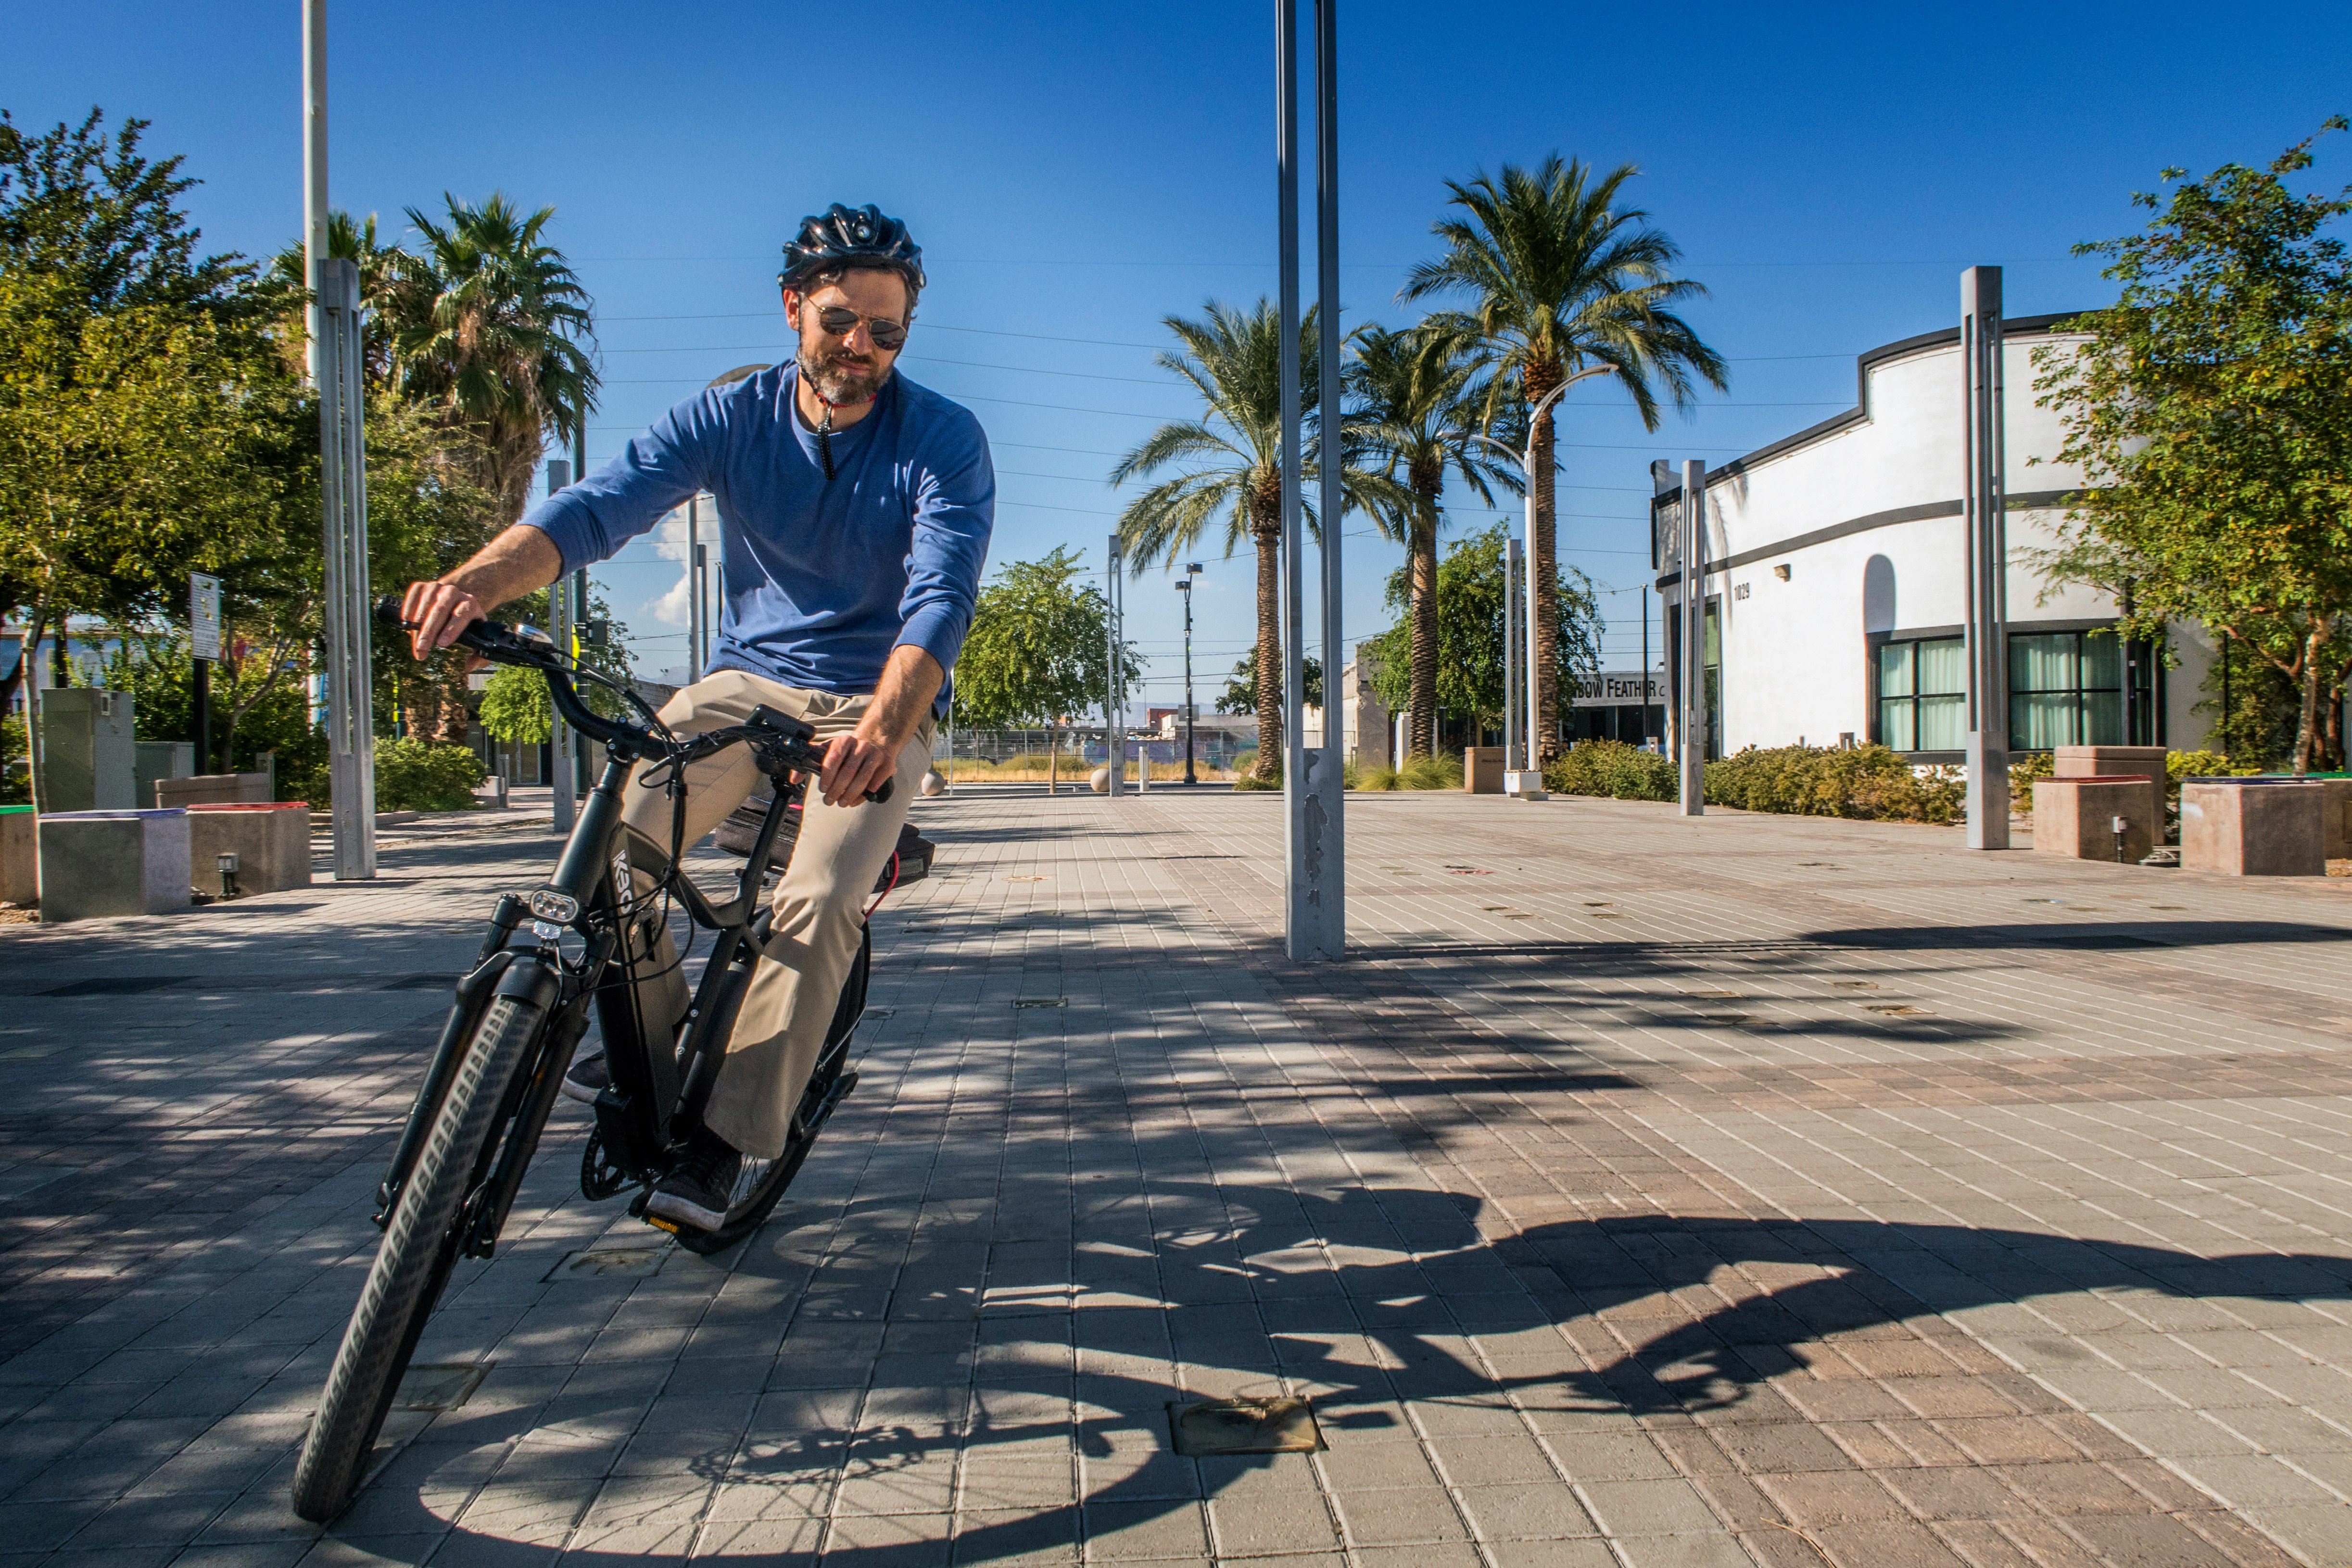 man in blue polo shirt riding bicycle during daytime